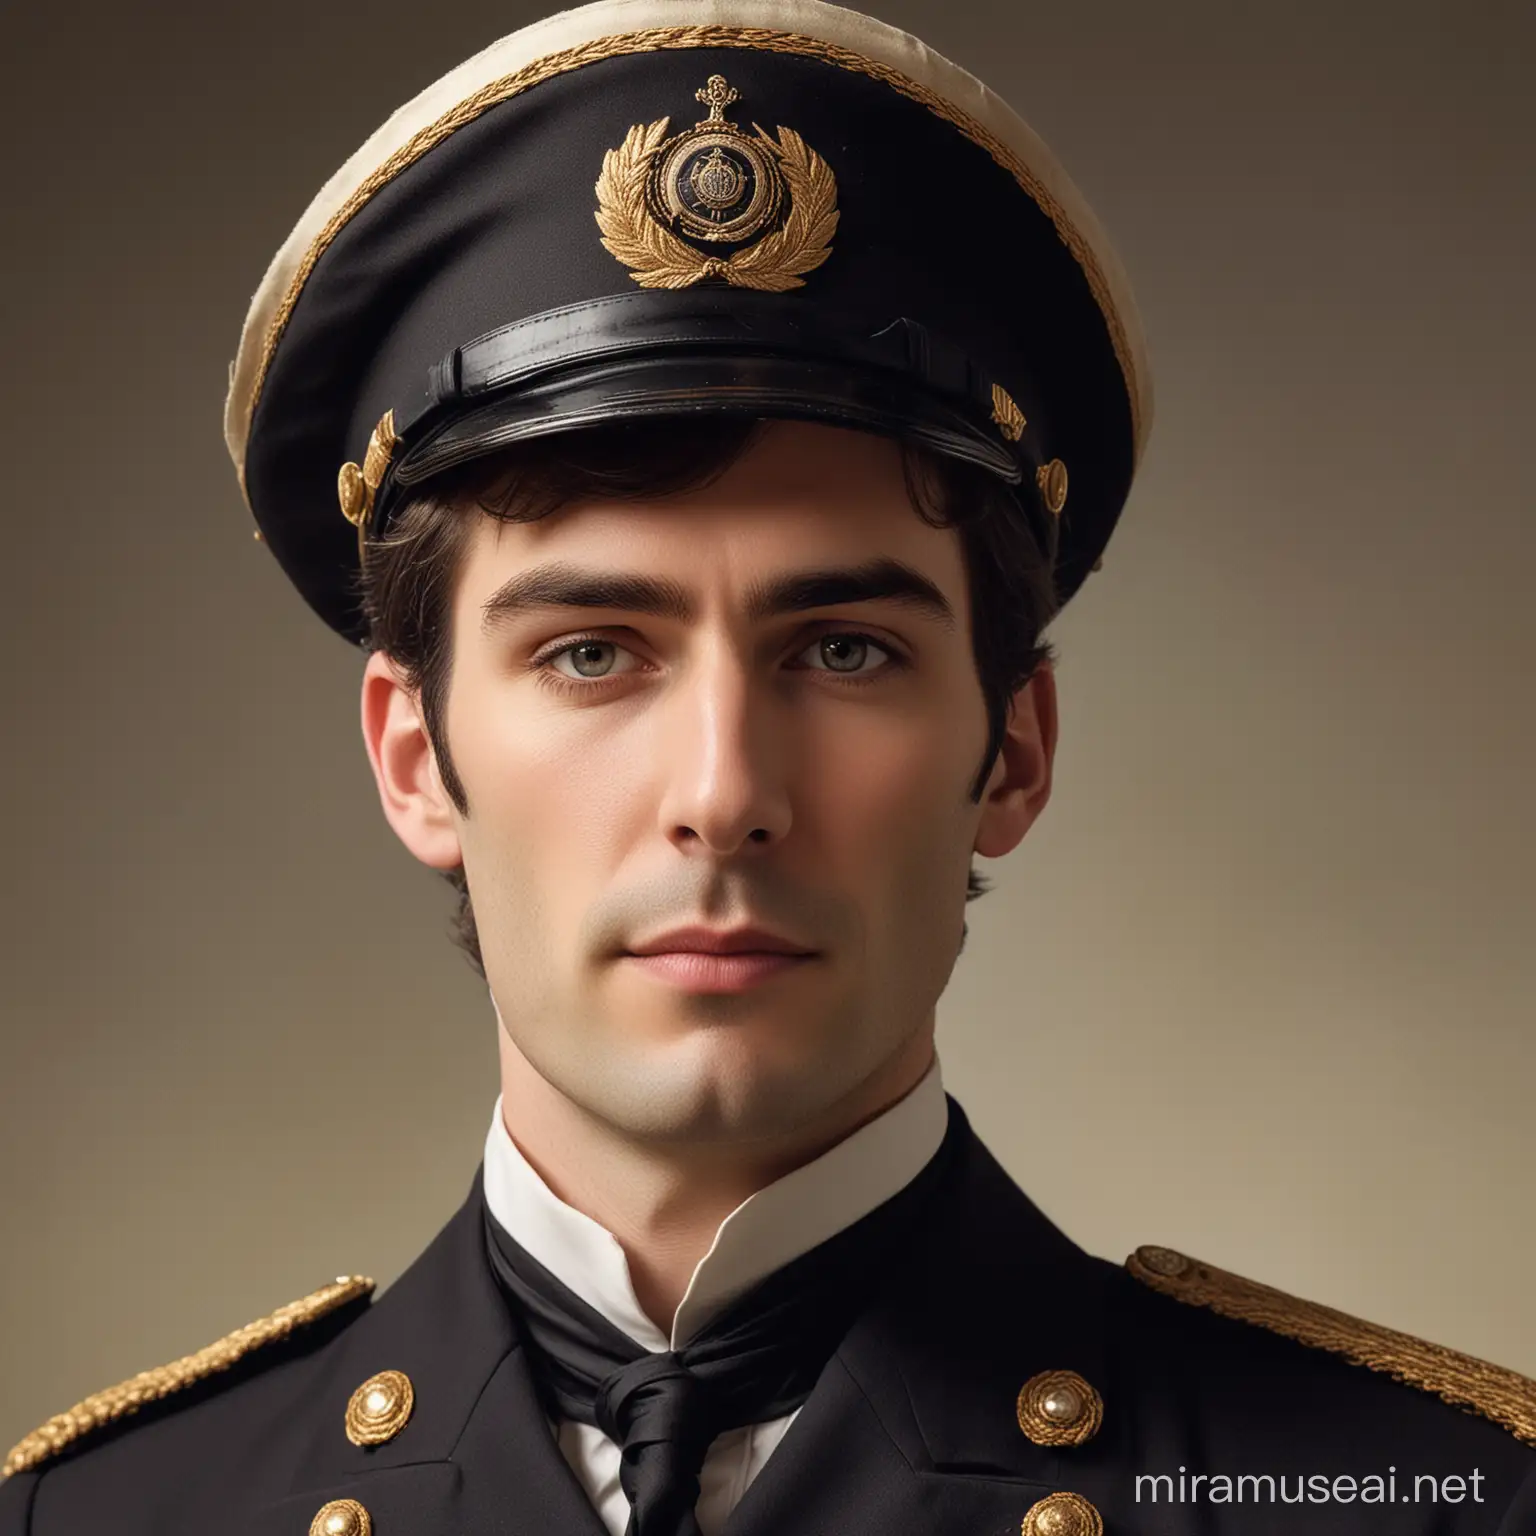 a tall and lanky man, he wears a ship captain hat, he has an androgynous face, he has an earring on his left ear, he has prominent sideburns, wears an early 20th century captain attire, very seductive and mysterious character